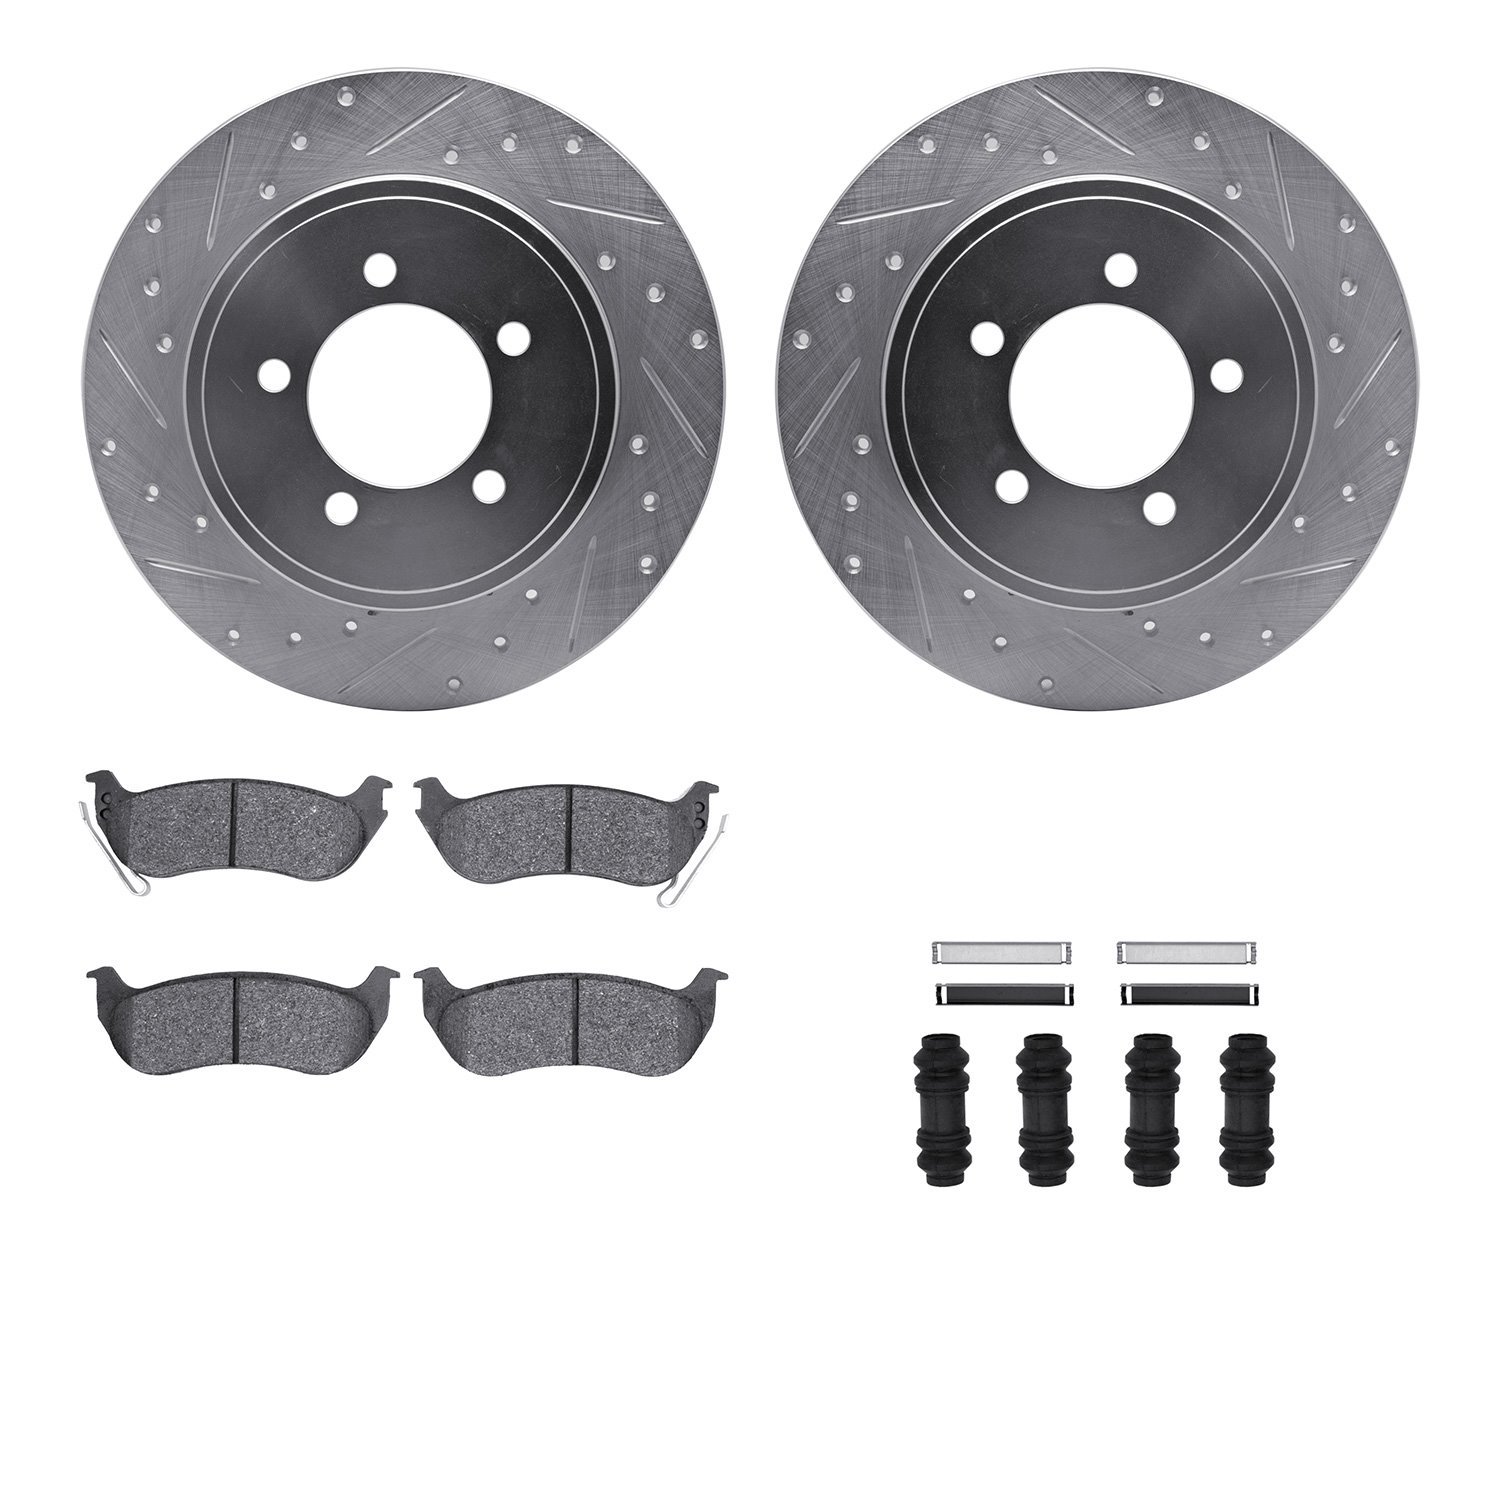 7412-54066 Drilled/Slotted Brake Rotors with Ultimate-Duty Brake Pads Kit & Hardware [Silver], 2006-2010 Ford/Lincoln/Mercury/Ma